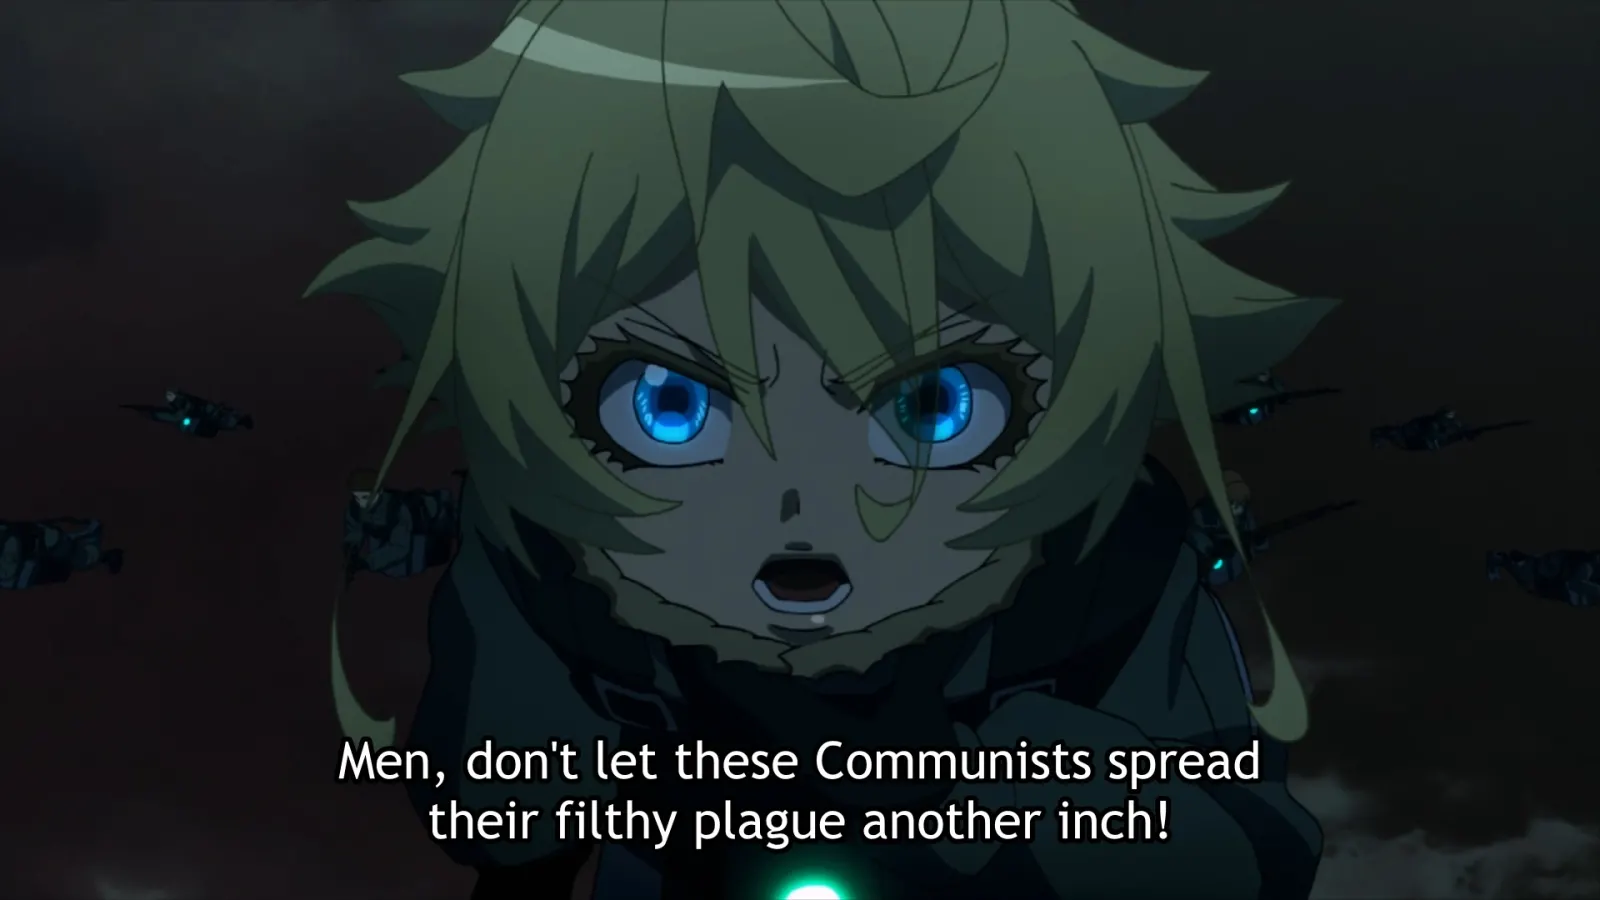 Tanya does really seem to have a true hatred of communism, it doesn’t seem to be an act like everything else she does.